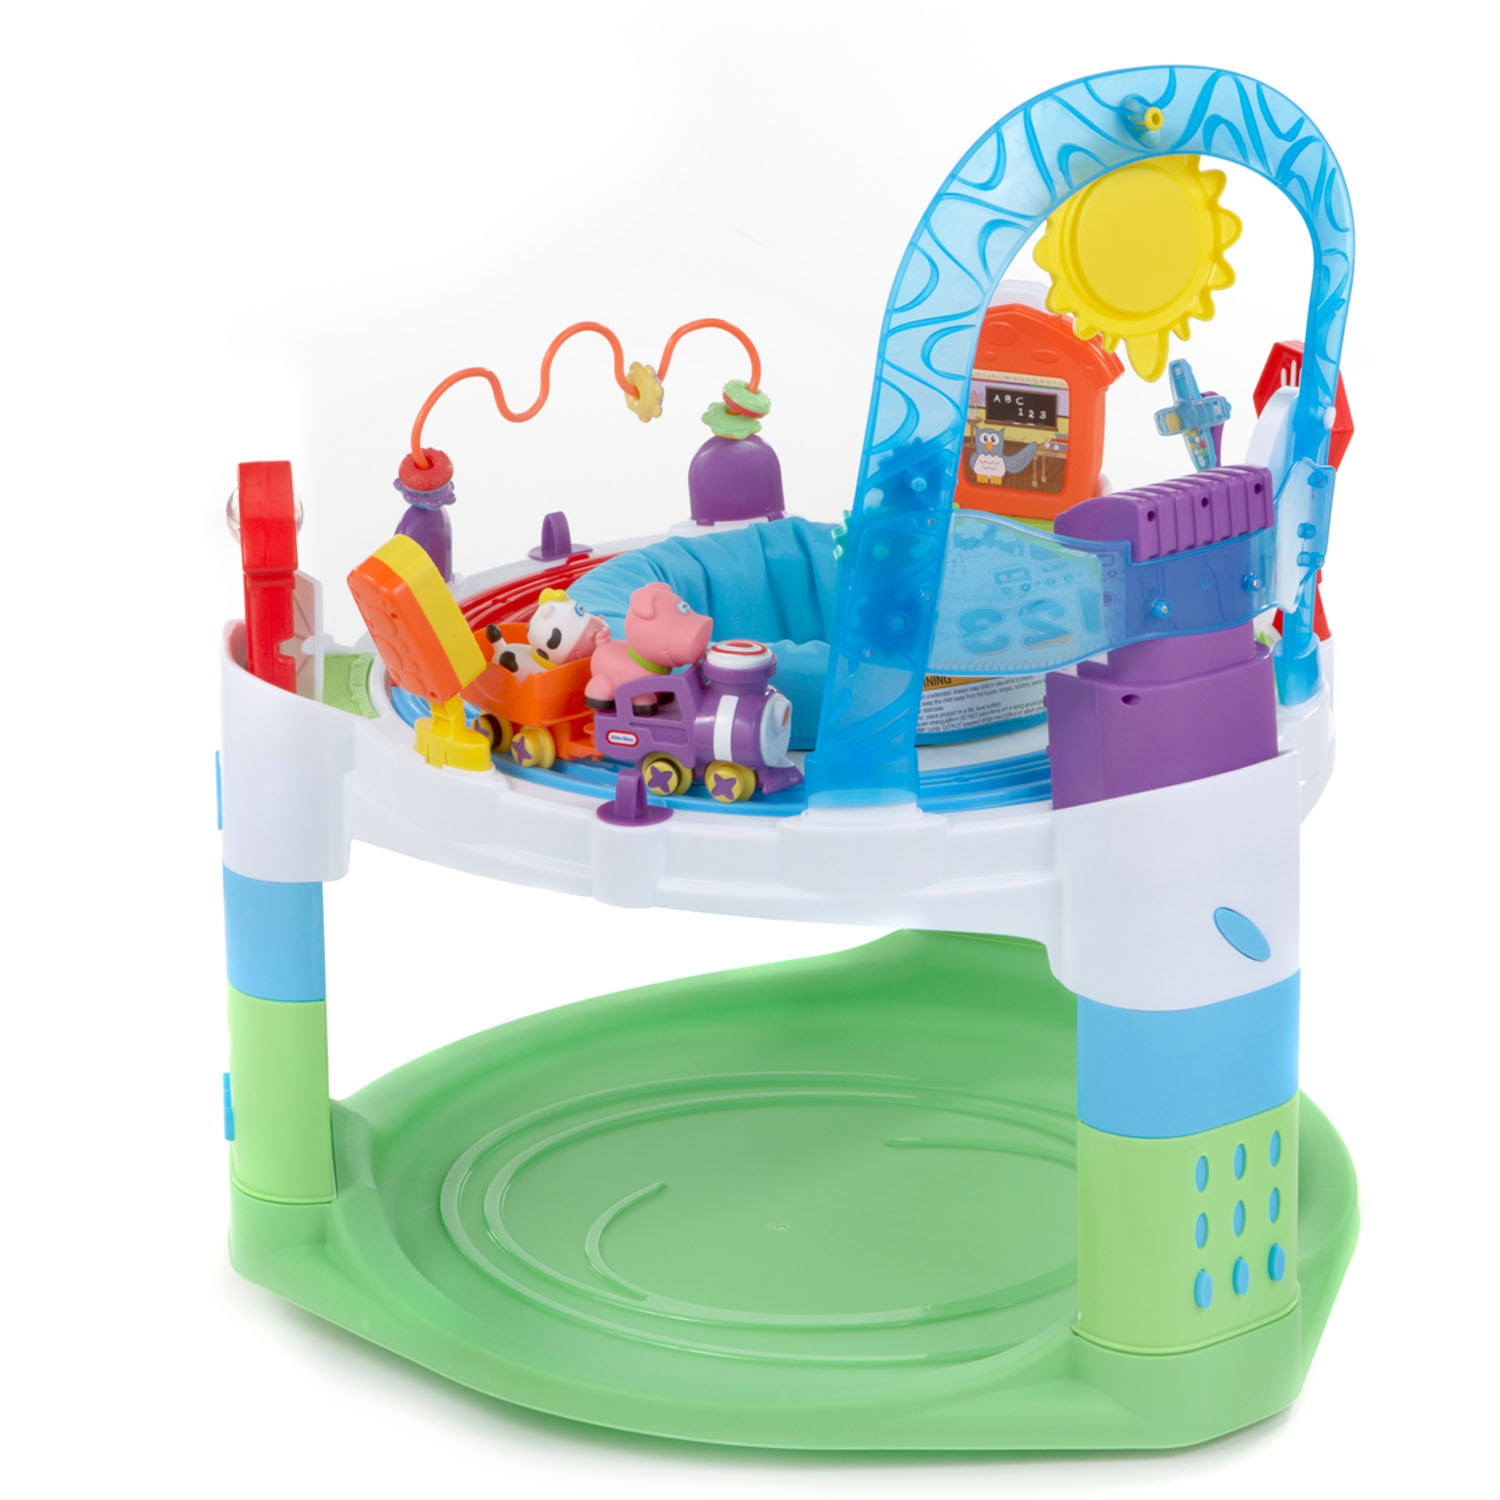 Little Tikes Discover & Learn Activity Center - image 4 of 4